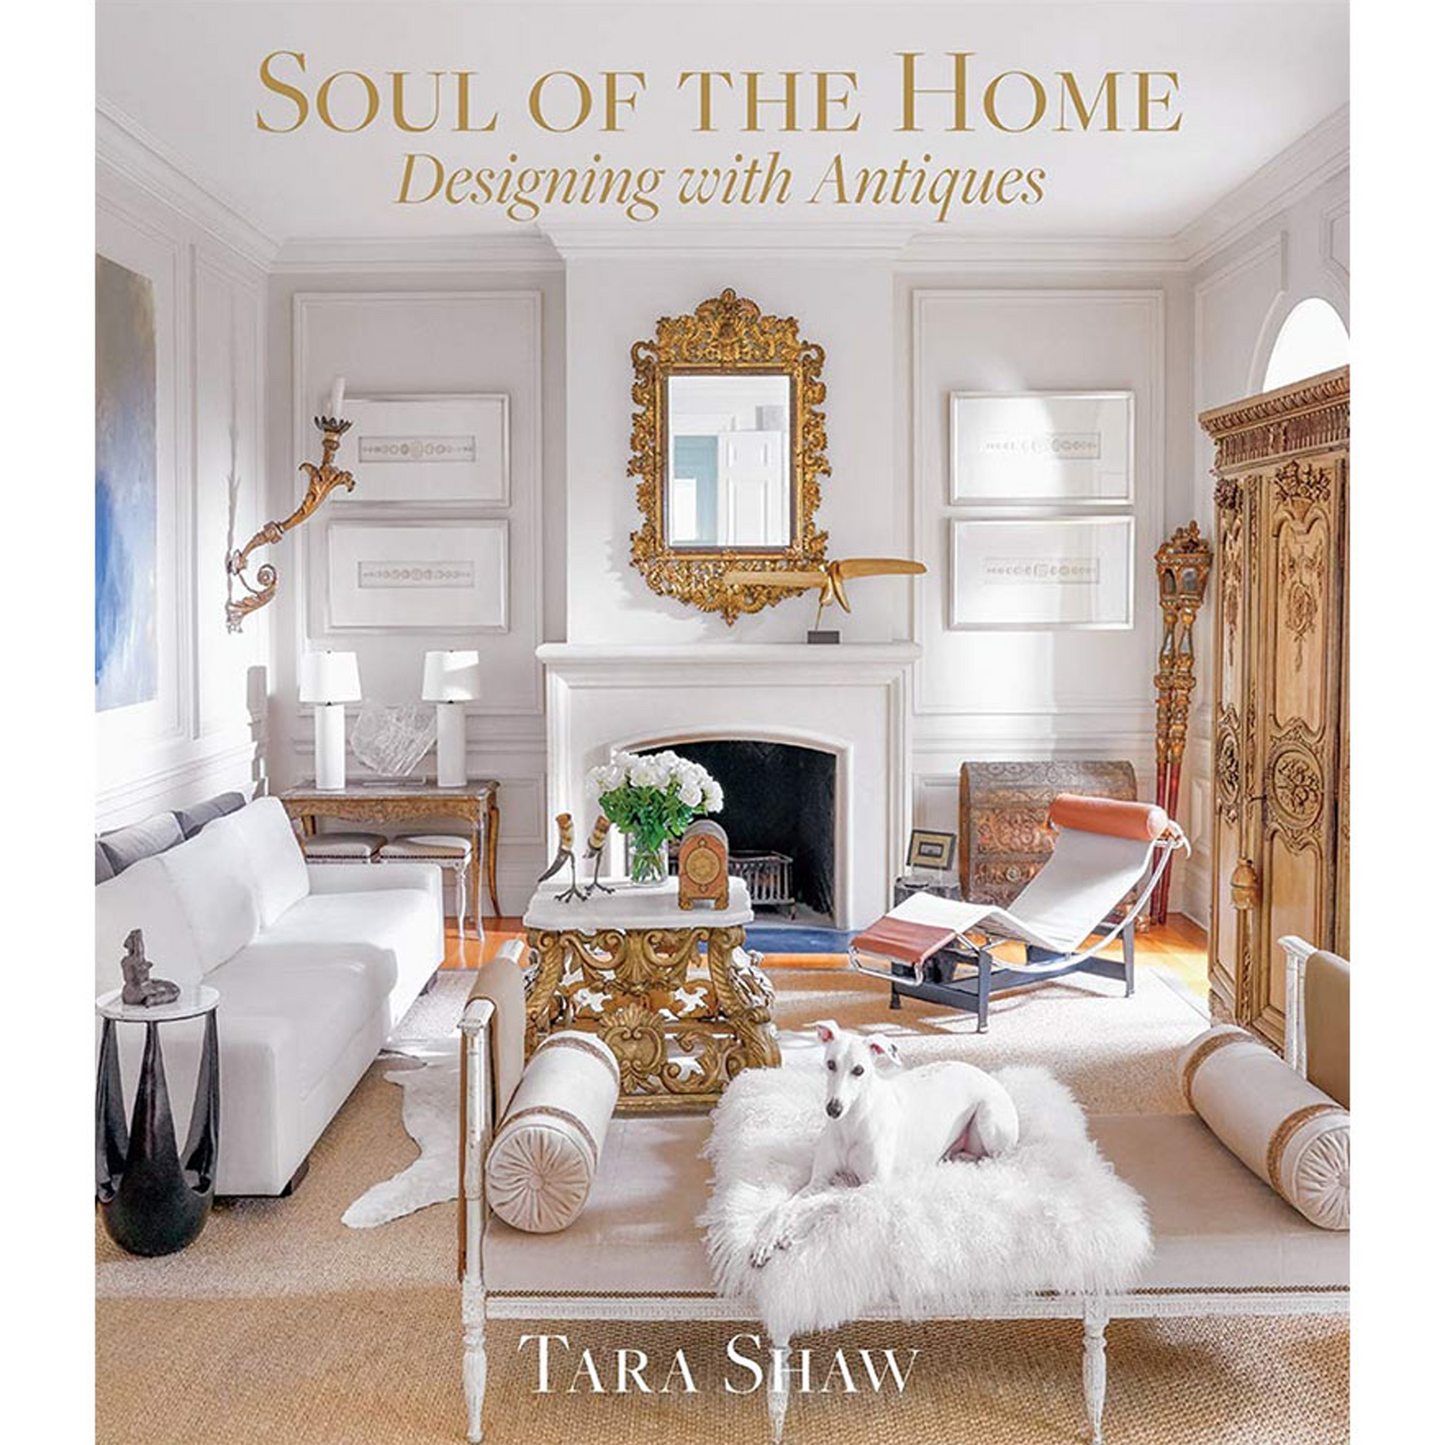 Soul of the Home by Tara Shaw